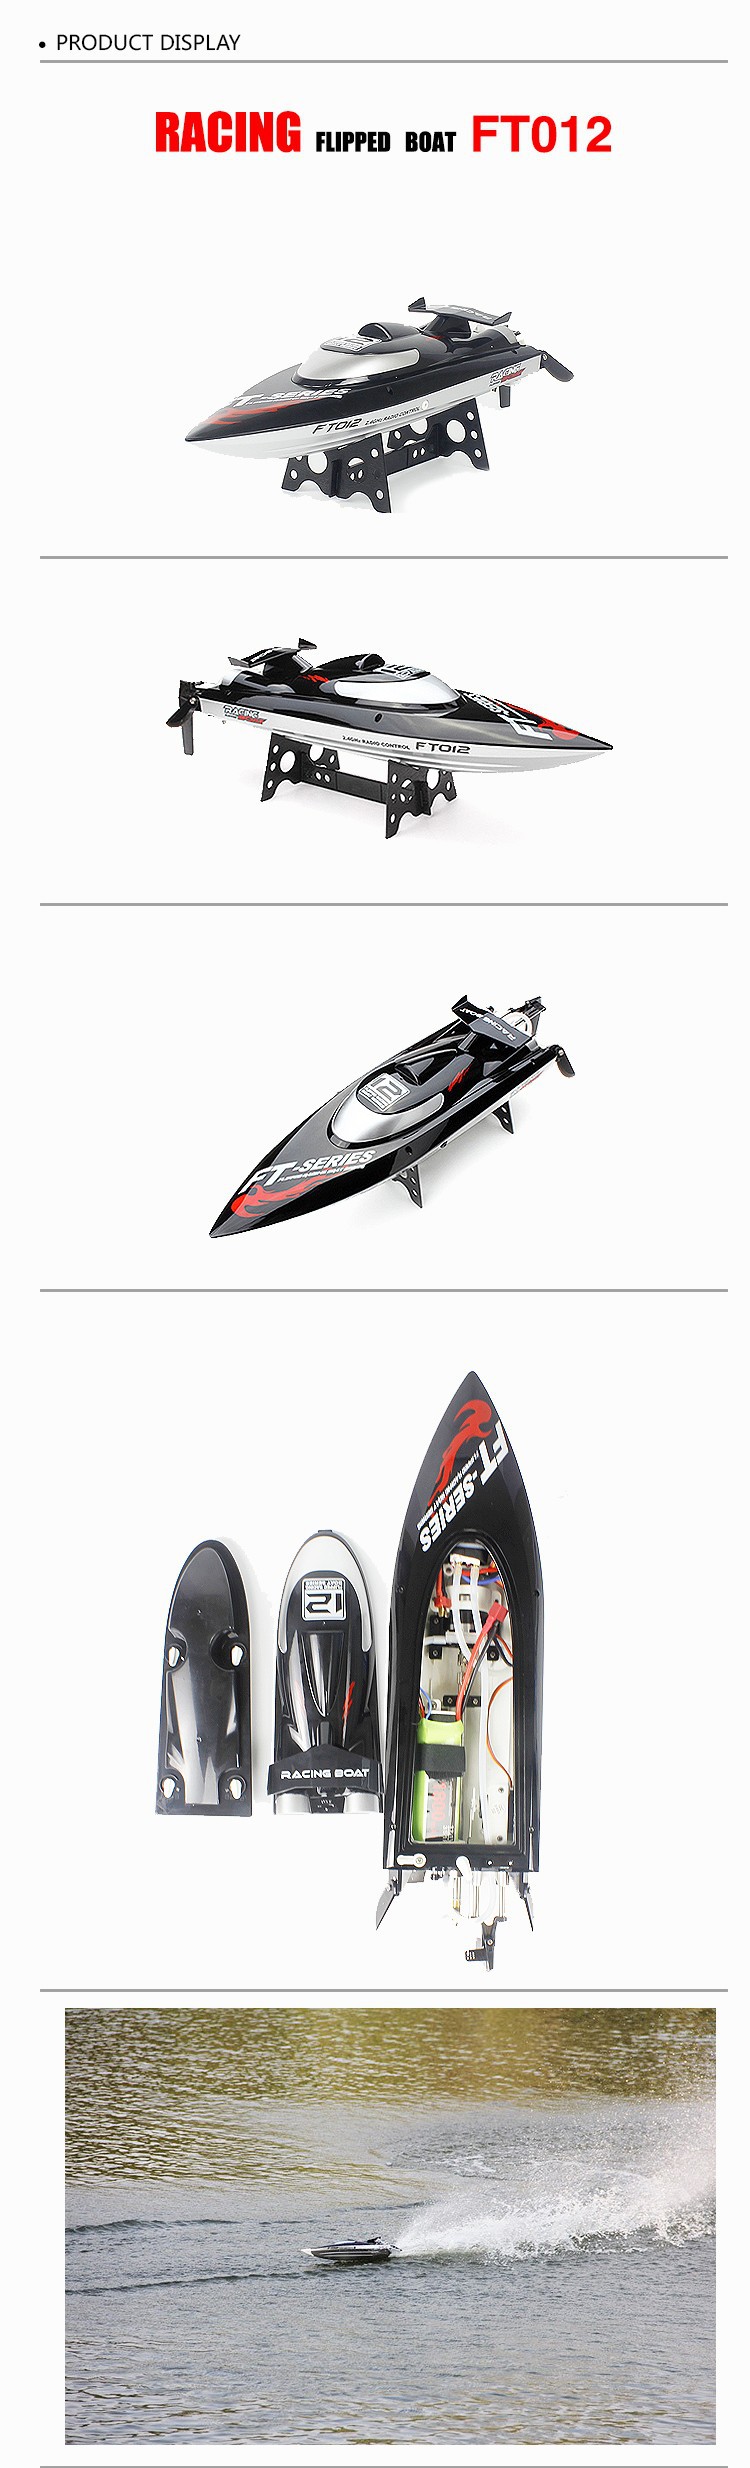 FT012-RC-Mini-4CH-4-Channel-Remote-Control-Boat-High speed-Racing-high speedboat-D1